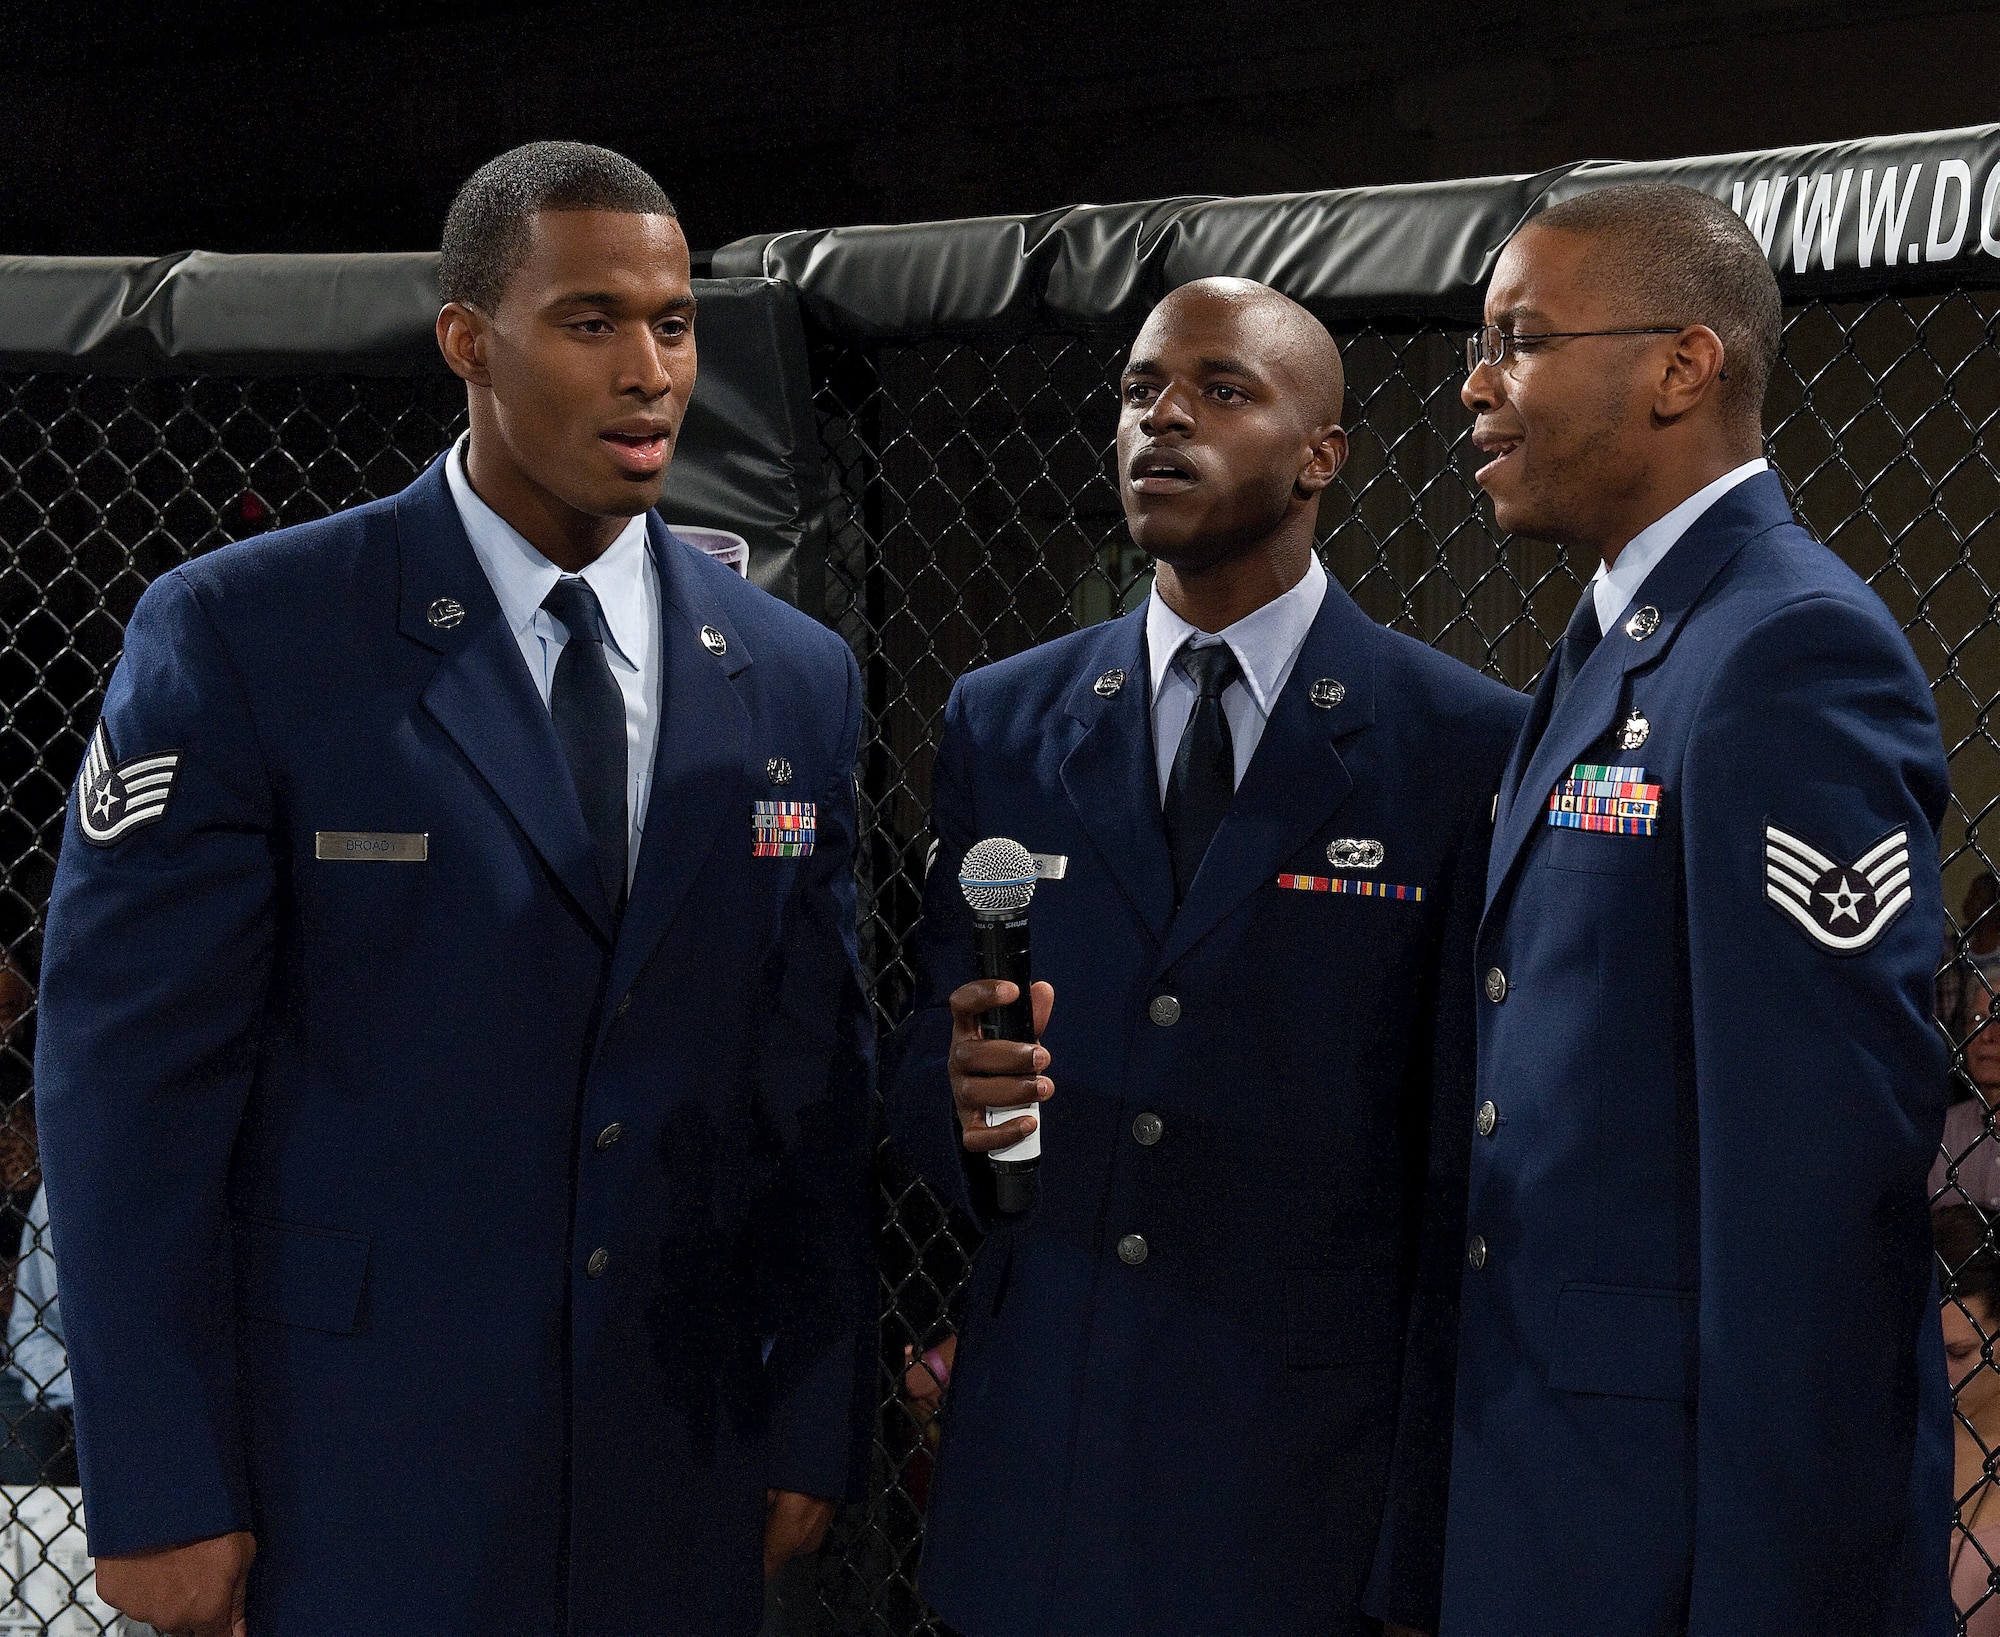 From left to right are Staff Sgt. Ryan Broady, Airman 1st Class Demarrius Jeffers and Staff Sgt. Ntambwe Kambeya singing the national anthem as part of the 512th Airlift Wing's Mass Enlistment Ceremony Oct. 13, 2012, held at a mixed martial arts event in Dover, Del. The trio members are assigned to the 436th Aerial Port Squadron, Dover Air Force Base, Del. (U.S. Air Force photo/Roland Balik)